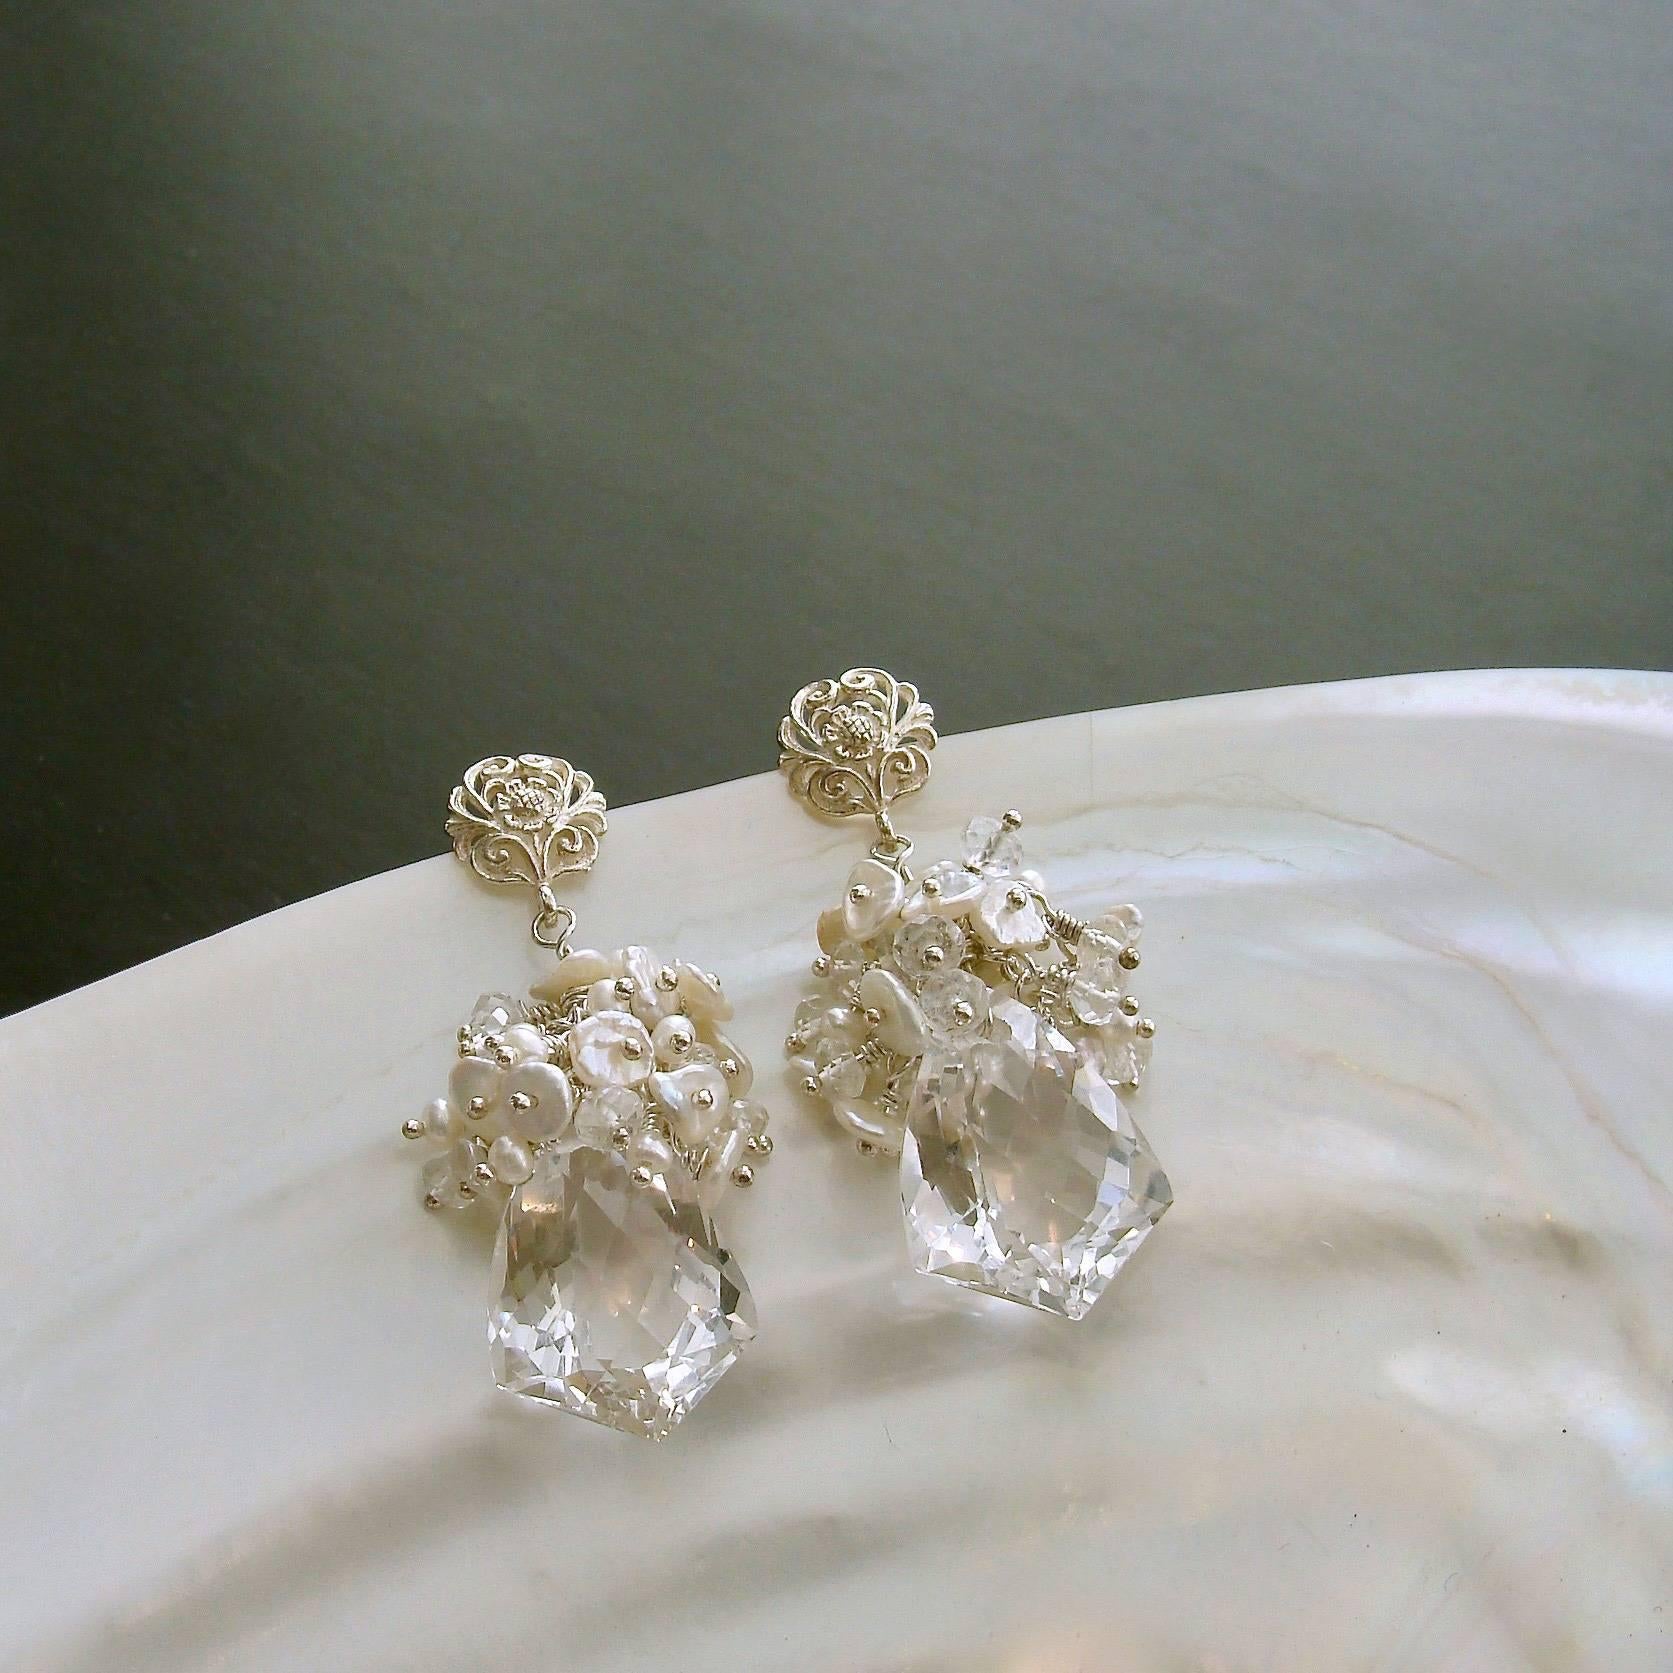 Orange Blossom II Earrings.

A gorgeous bridal earring design, inspired by the coveted perfumed flowers of orange trees, is aptly named Orange Blossom II Earrings.  A profusion of creamy ivory freshwater seed pearls and miniature Keshi petal pearls